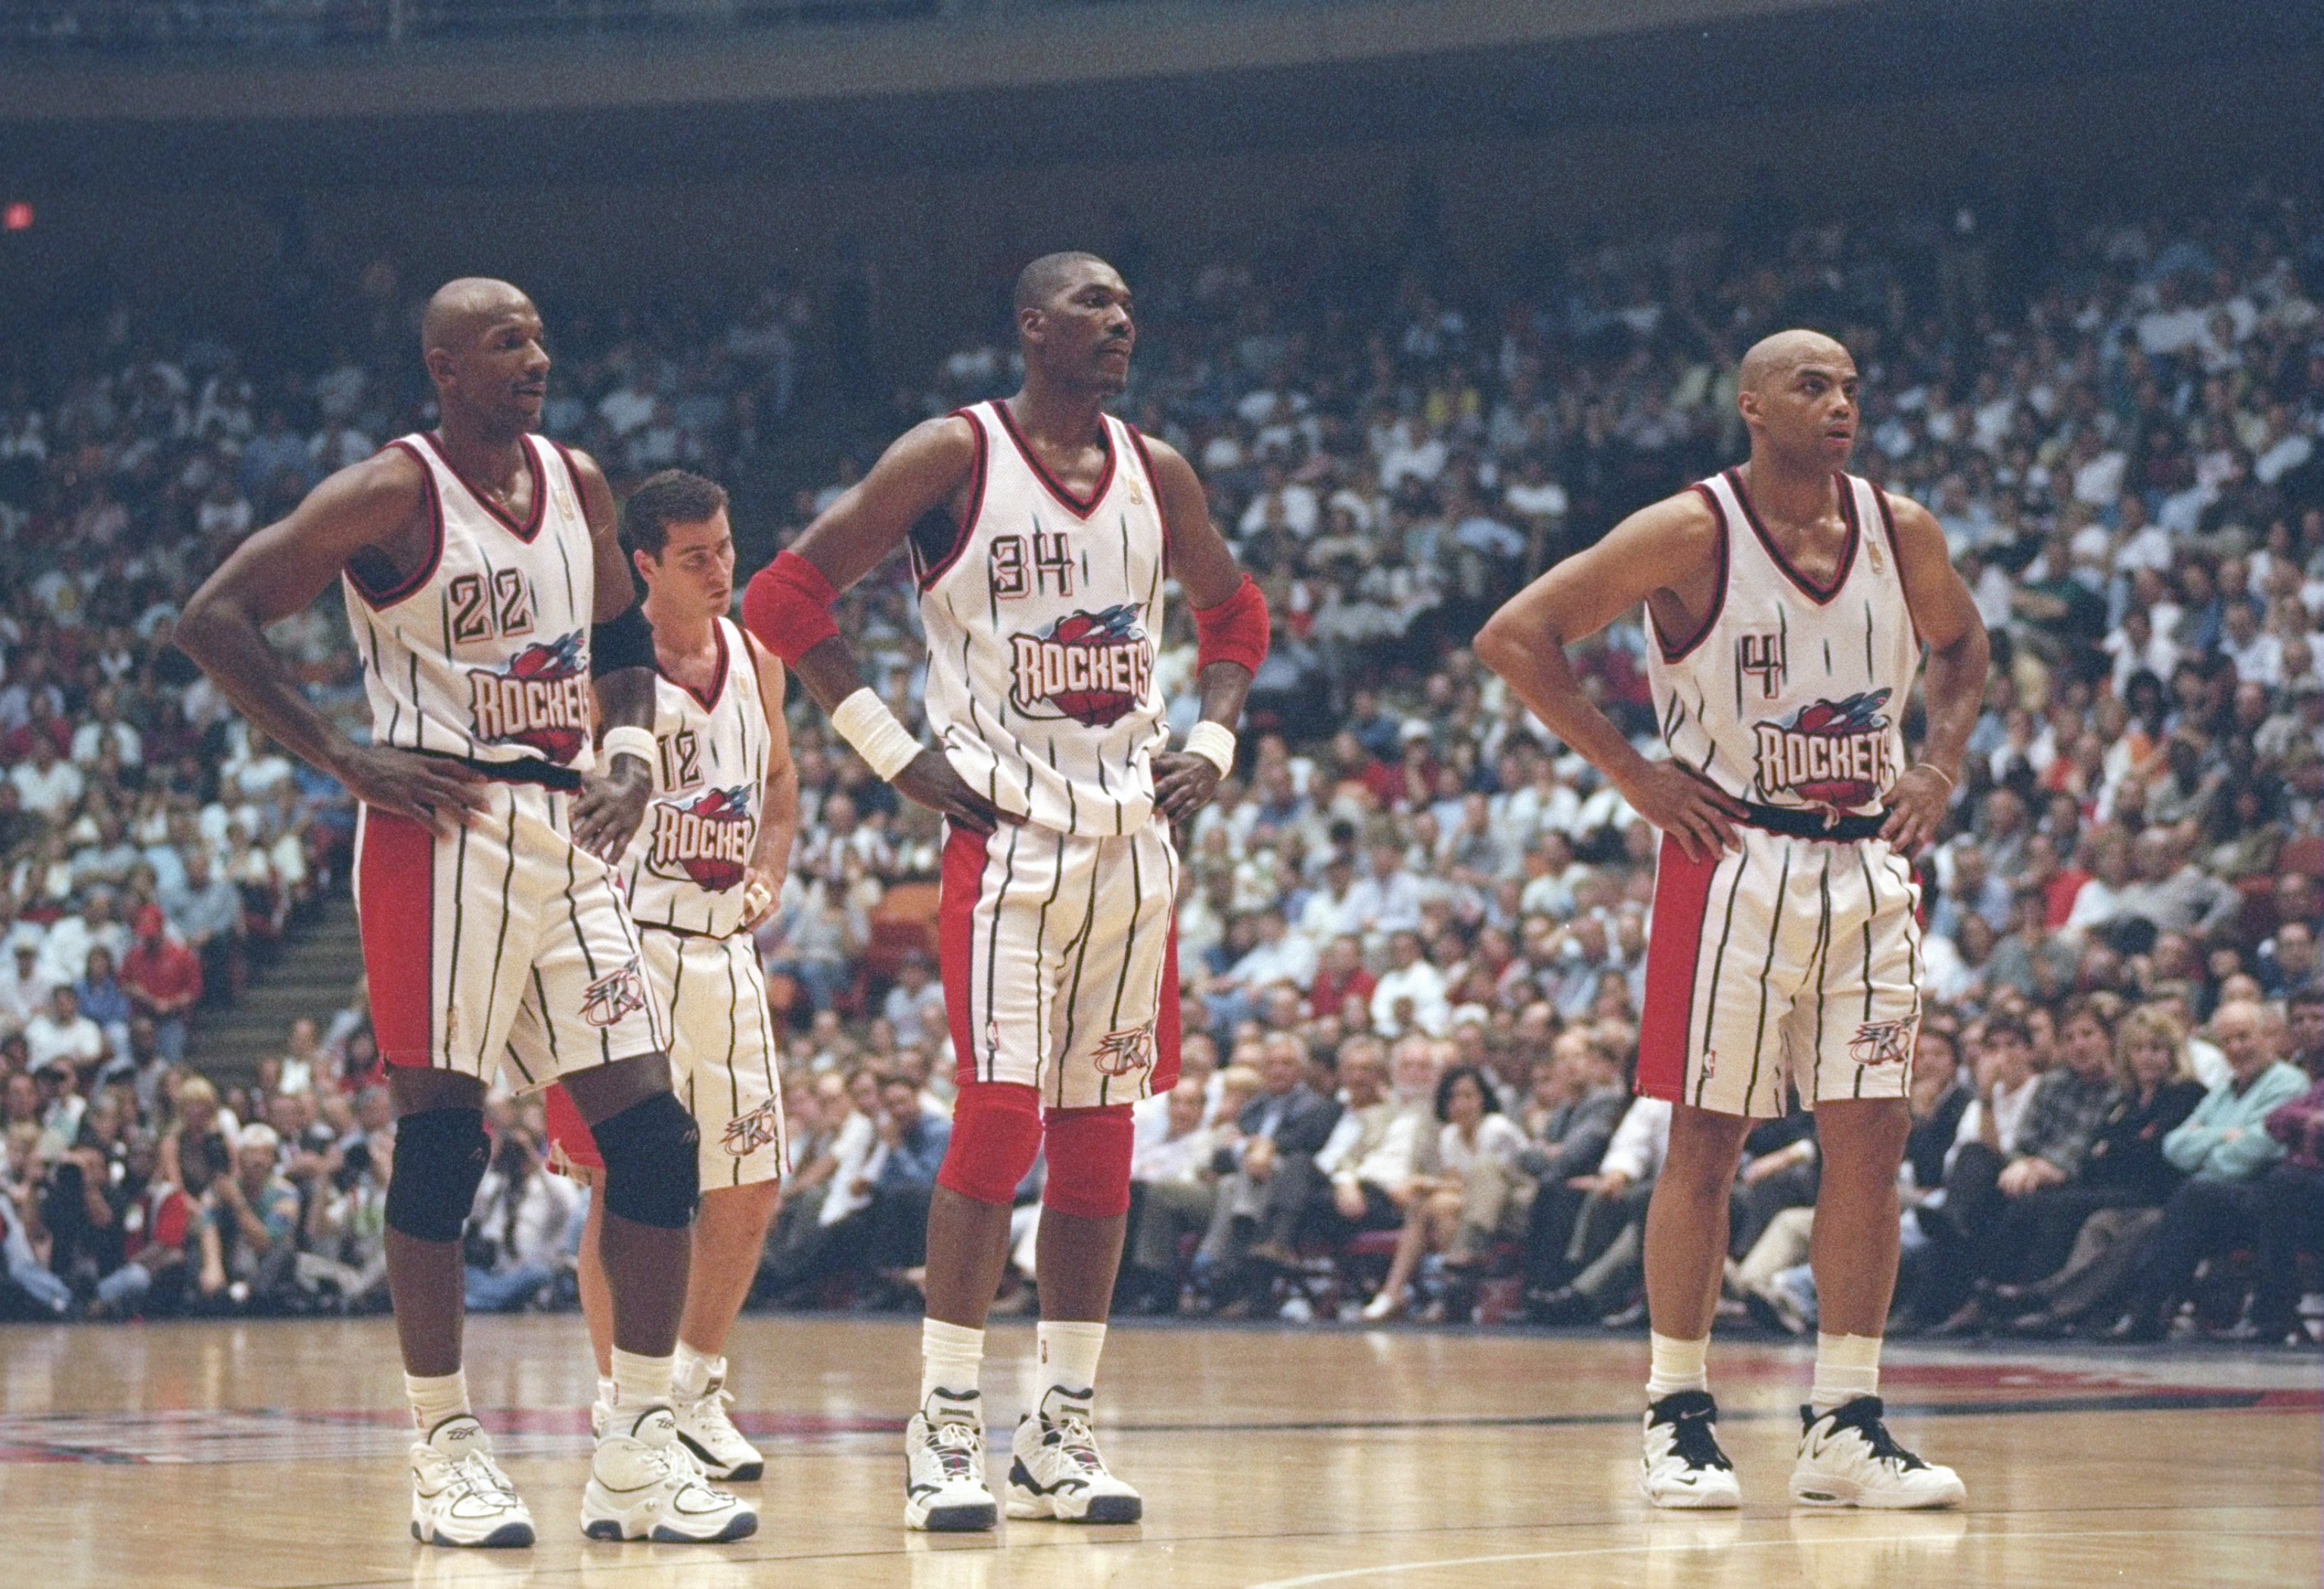 7 May 1997:  Center Hakeem Olajuwon, forward Clyde Drexler (left) and forward Charles Barkley of the Houston Rockets stands on the court during a playoff game against the Seattle Supersonics at the Summit in Houston, Texas.  The Supersonics won the game 1